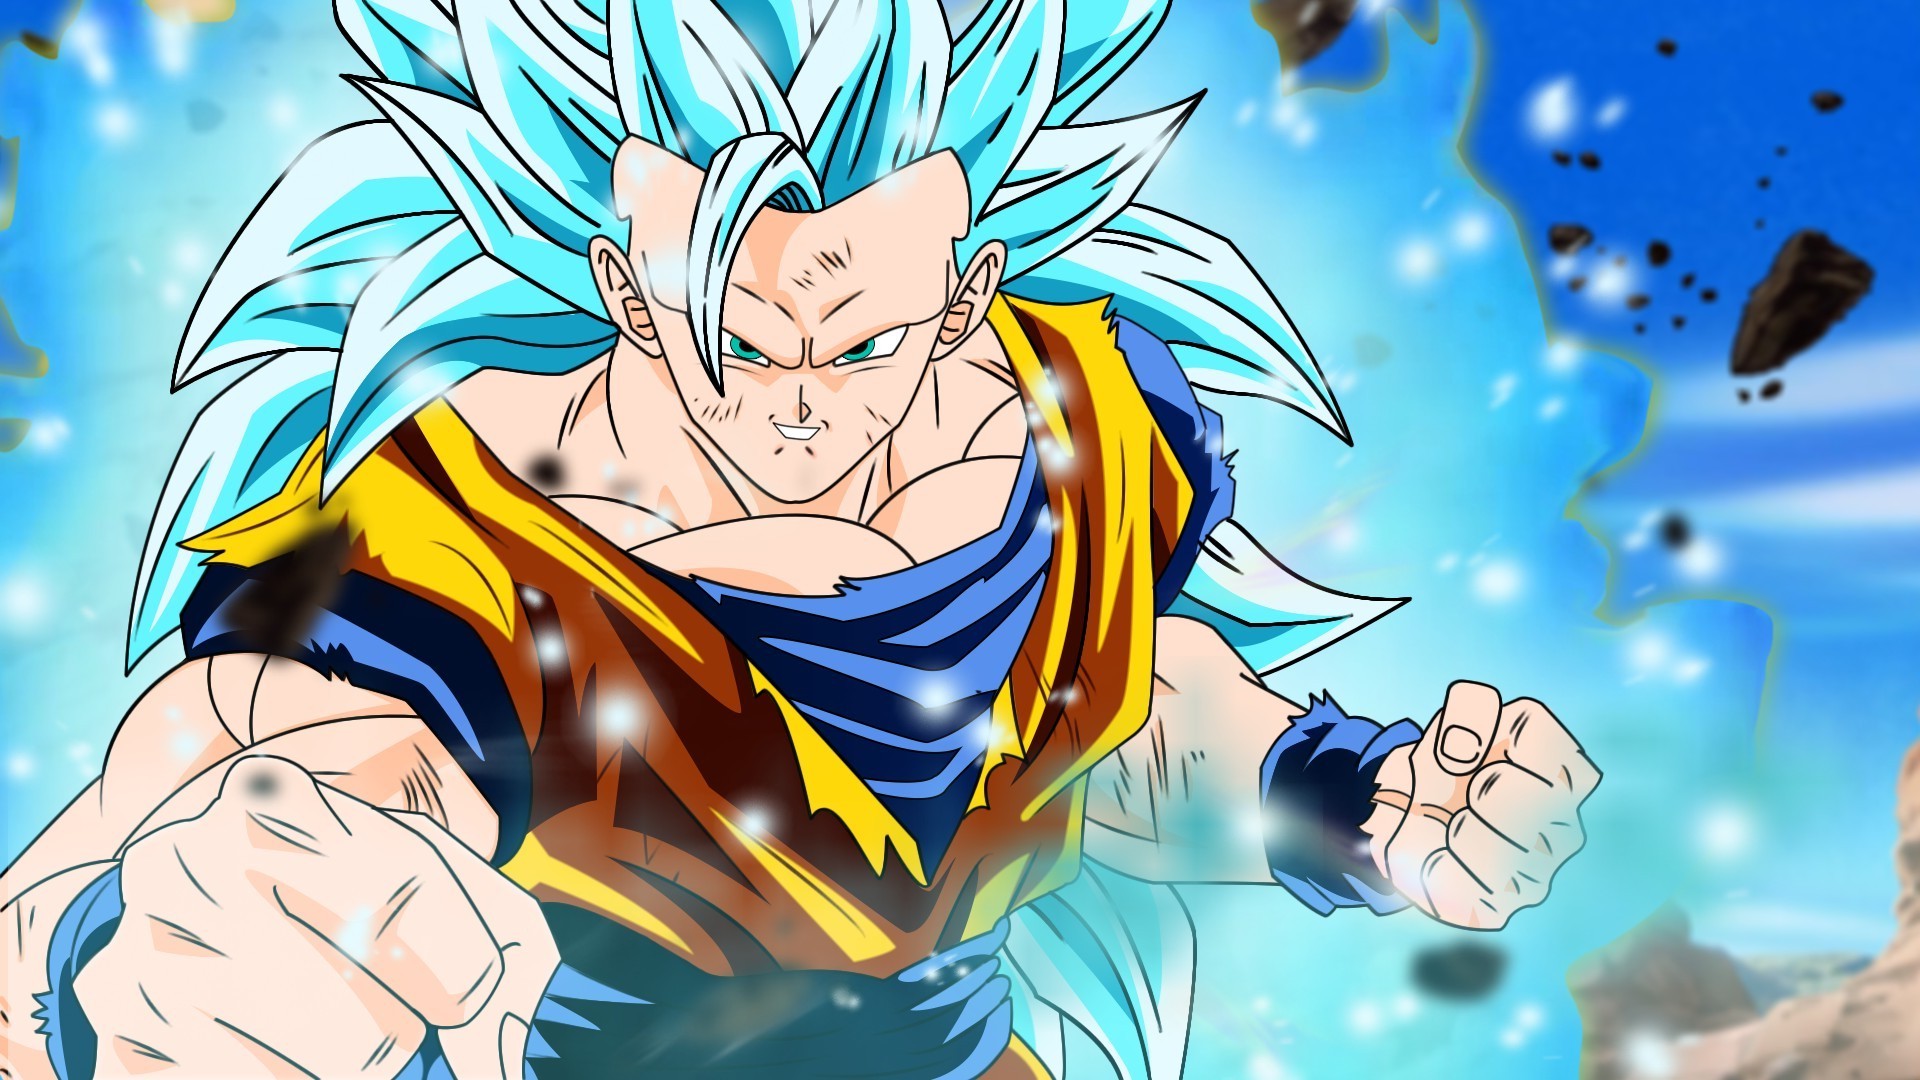 Wallpaper Goku SSJ3 HD With Resolution 1920X1080 pixel. You can make this wallpaper for your Desktop Computer Backgrounds, Mac Wallpapers, Android Lock screen or iPhone Screensavers